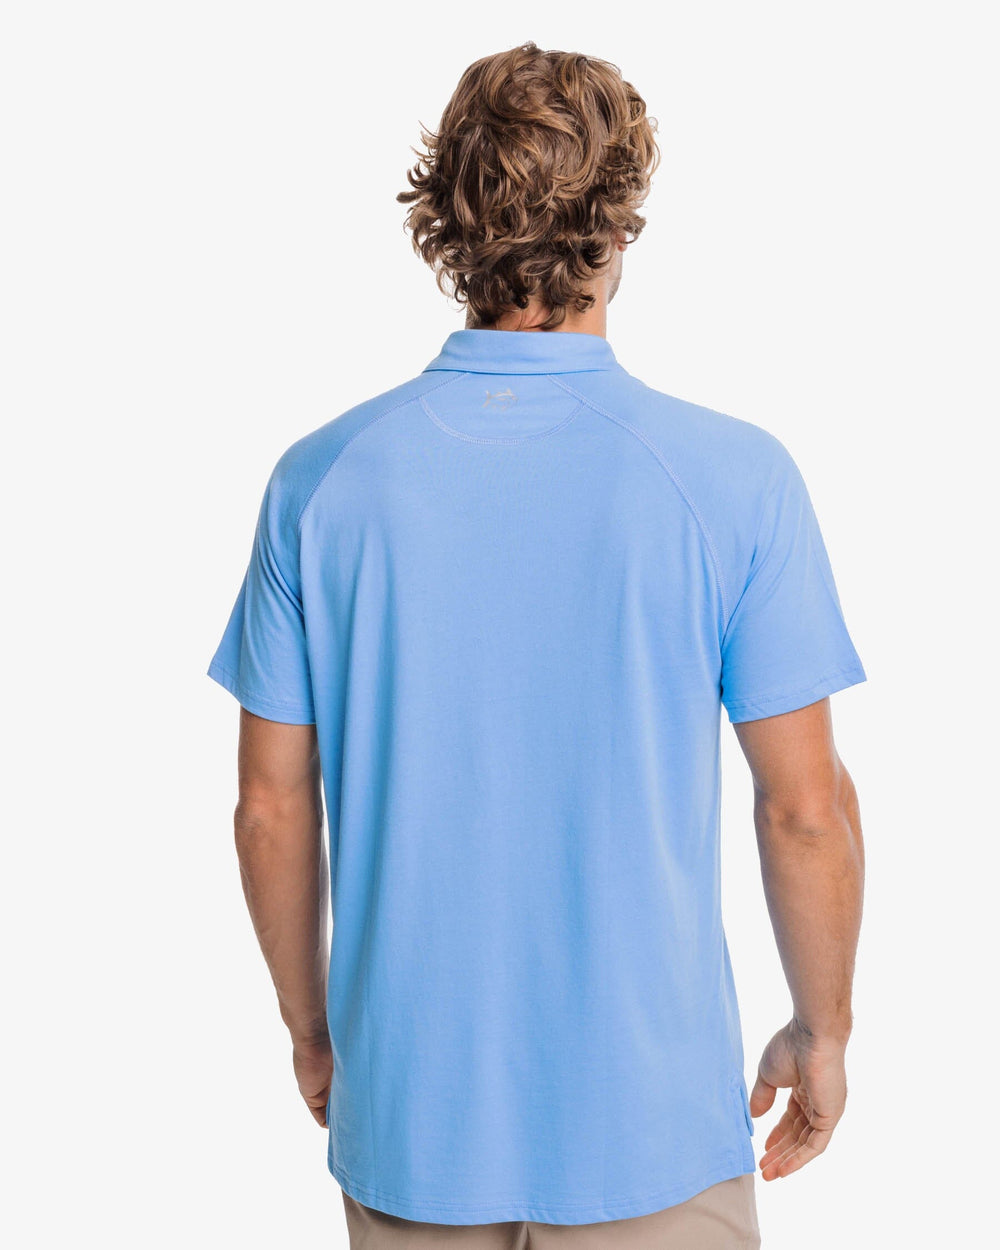 The back view of the Southern Tide Racquet Polo Shirt by Southern Tide - Boat Blue